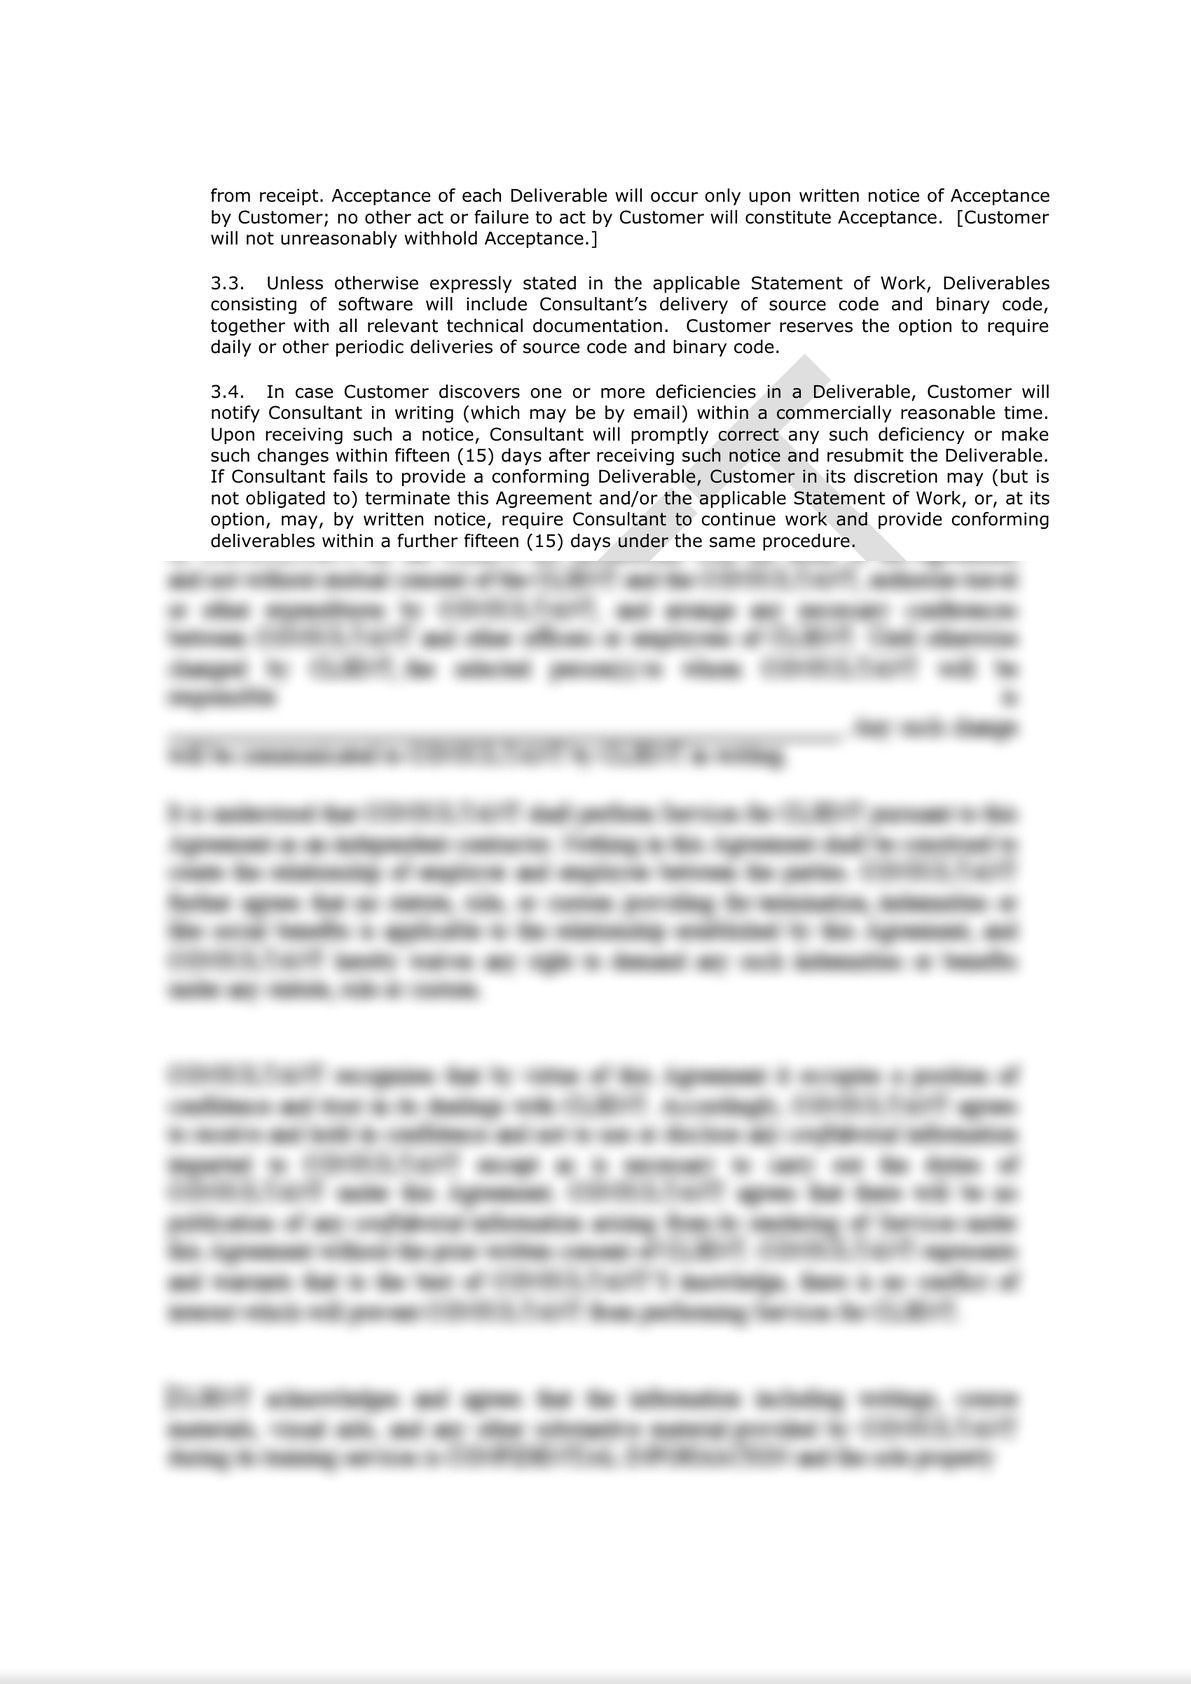 Software Consulting Agreement (Pro-Customer)-1